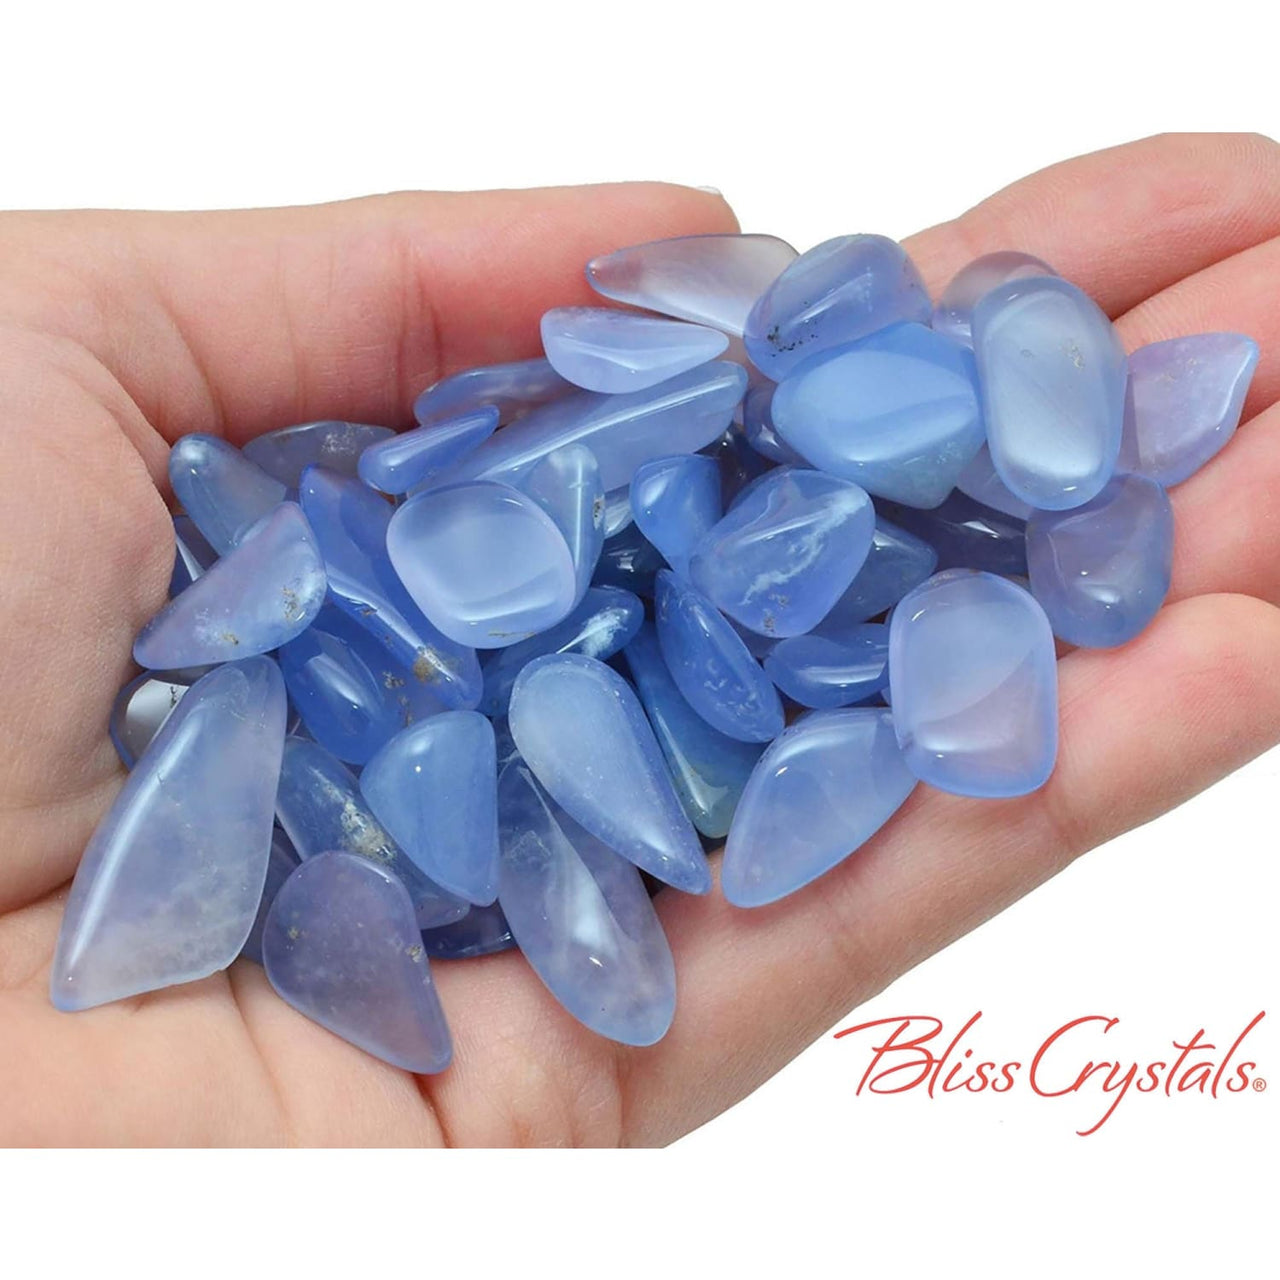 1 gm Gem BLUE CHALCEDONY Agate Tumbled Stone (5 Carat) Small